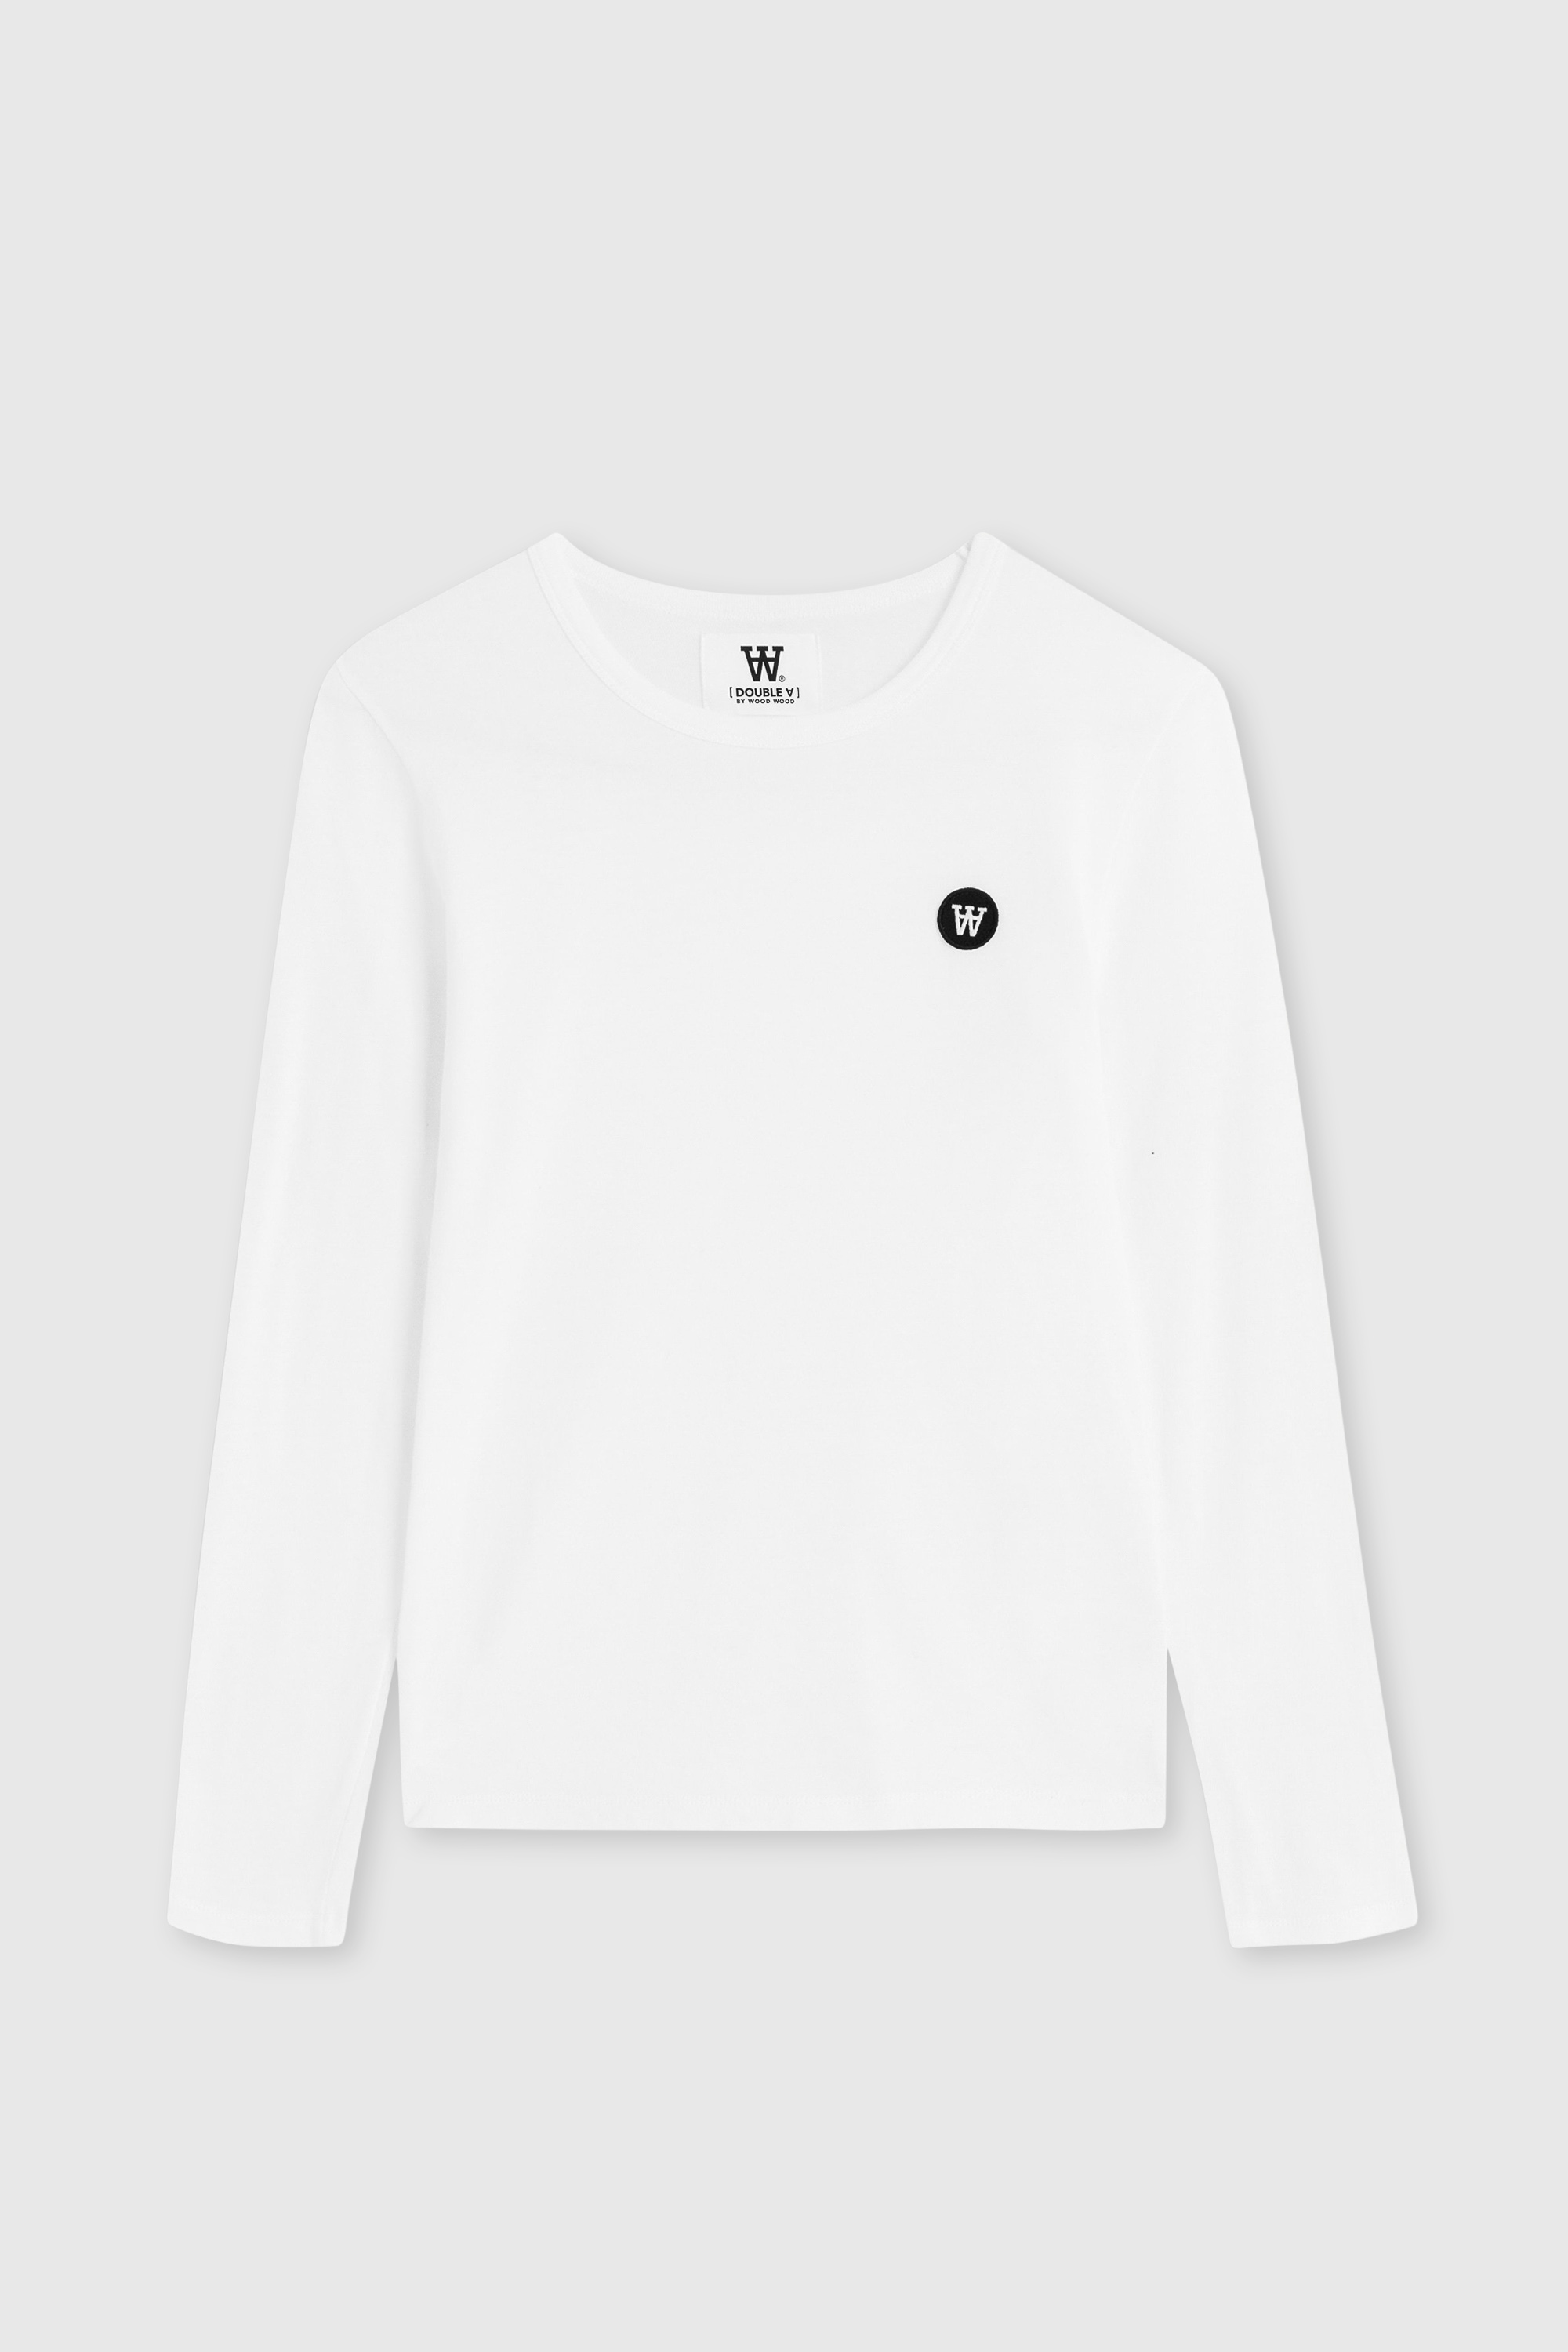 Double A by Wood Wood Moa long sleeve Bright white | WoodWood.com